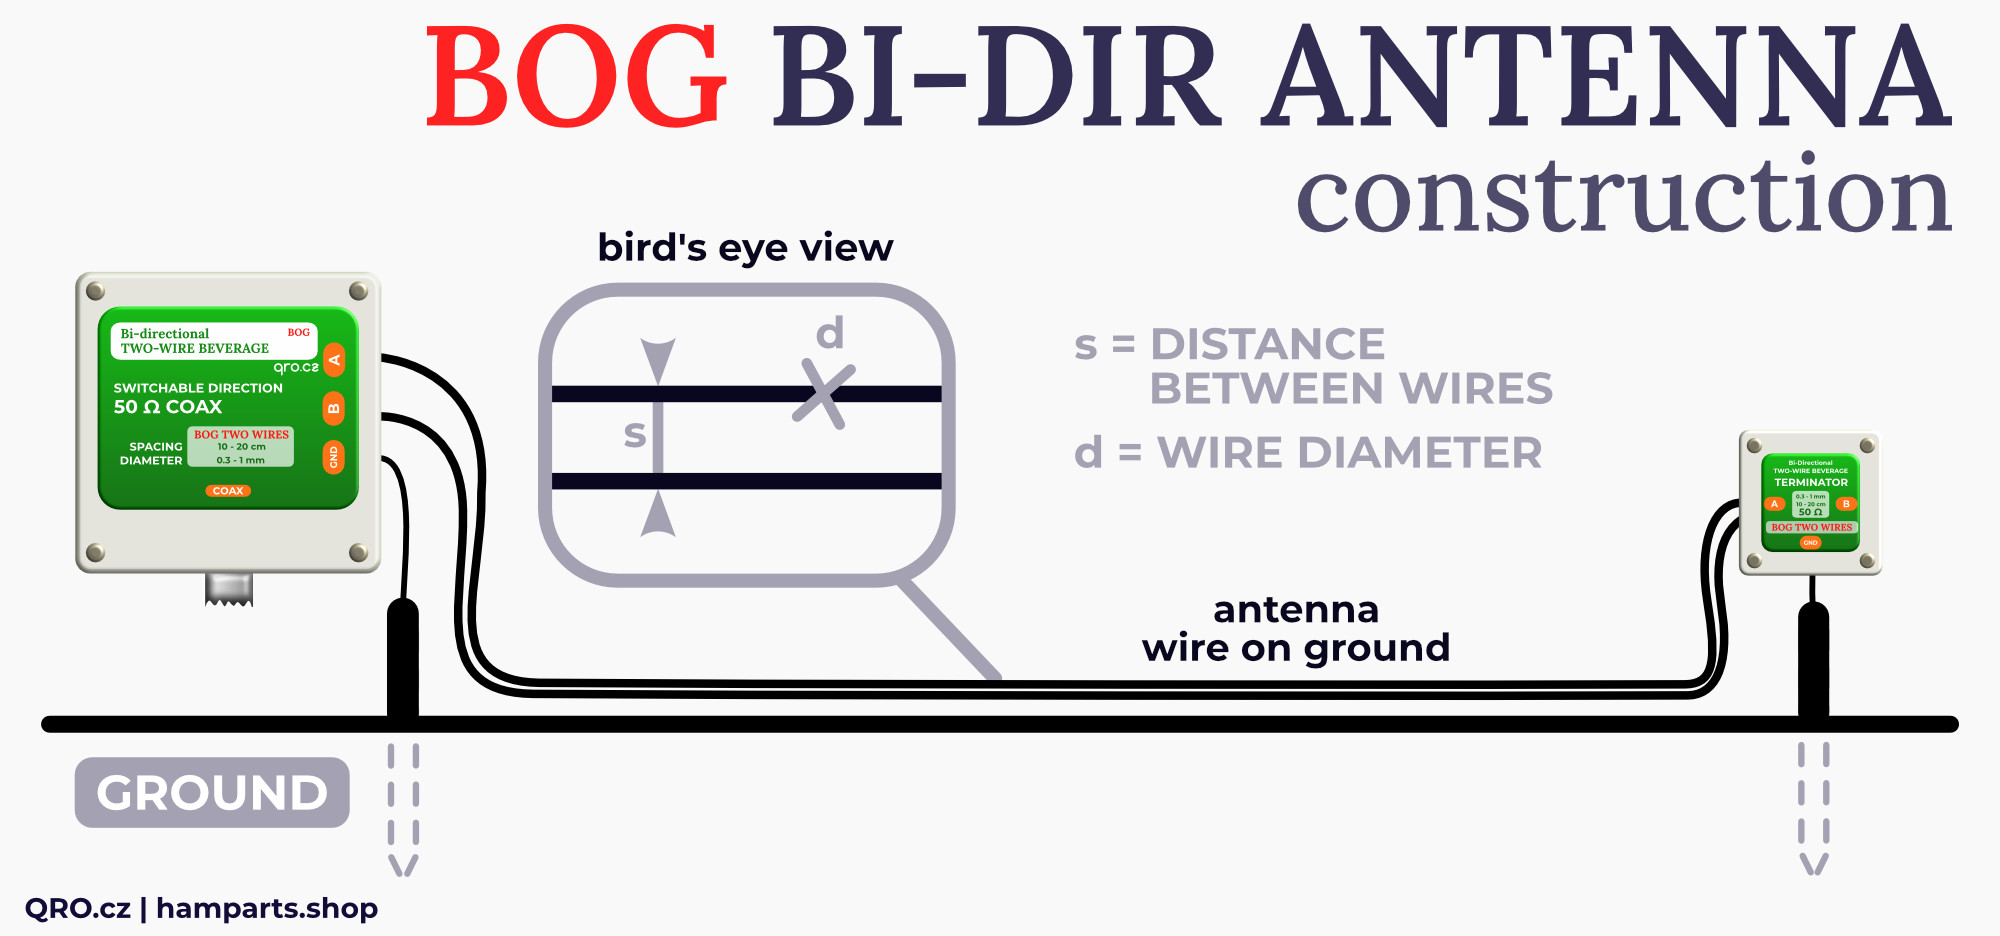 construction of bi-directional rx antenna by qro.cz hamparts.shop